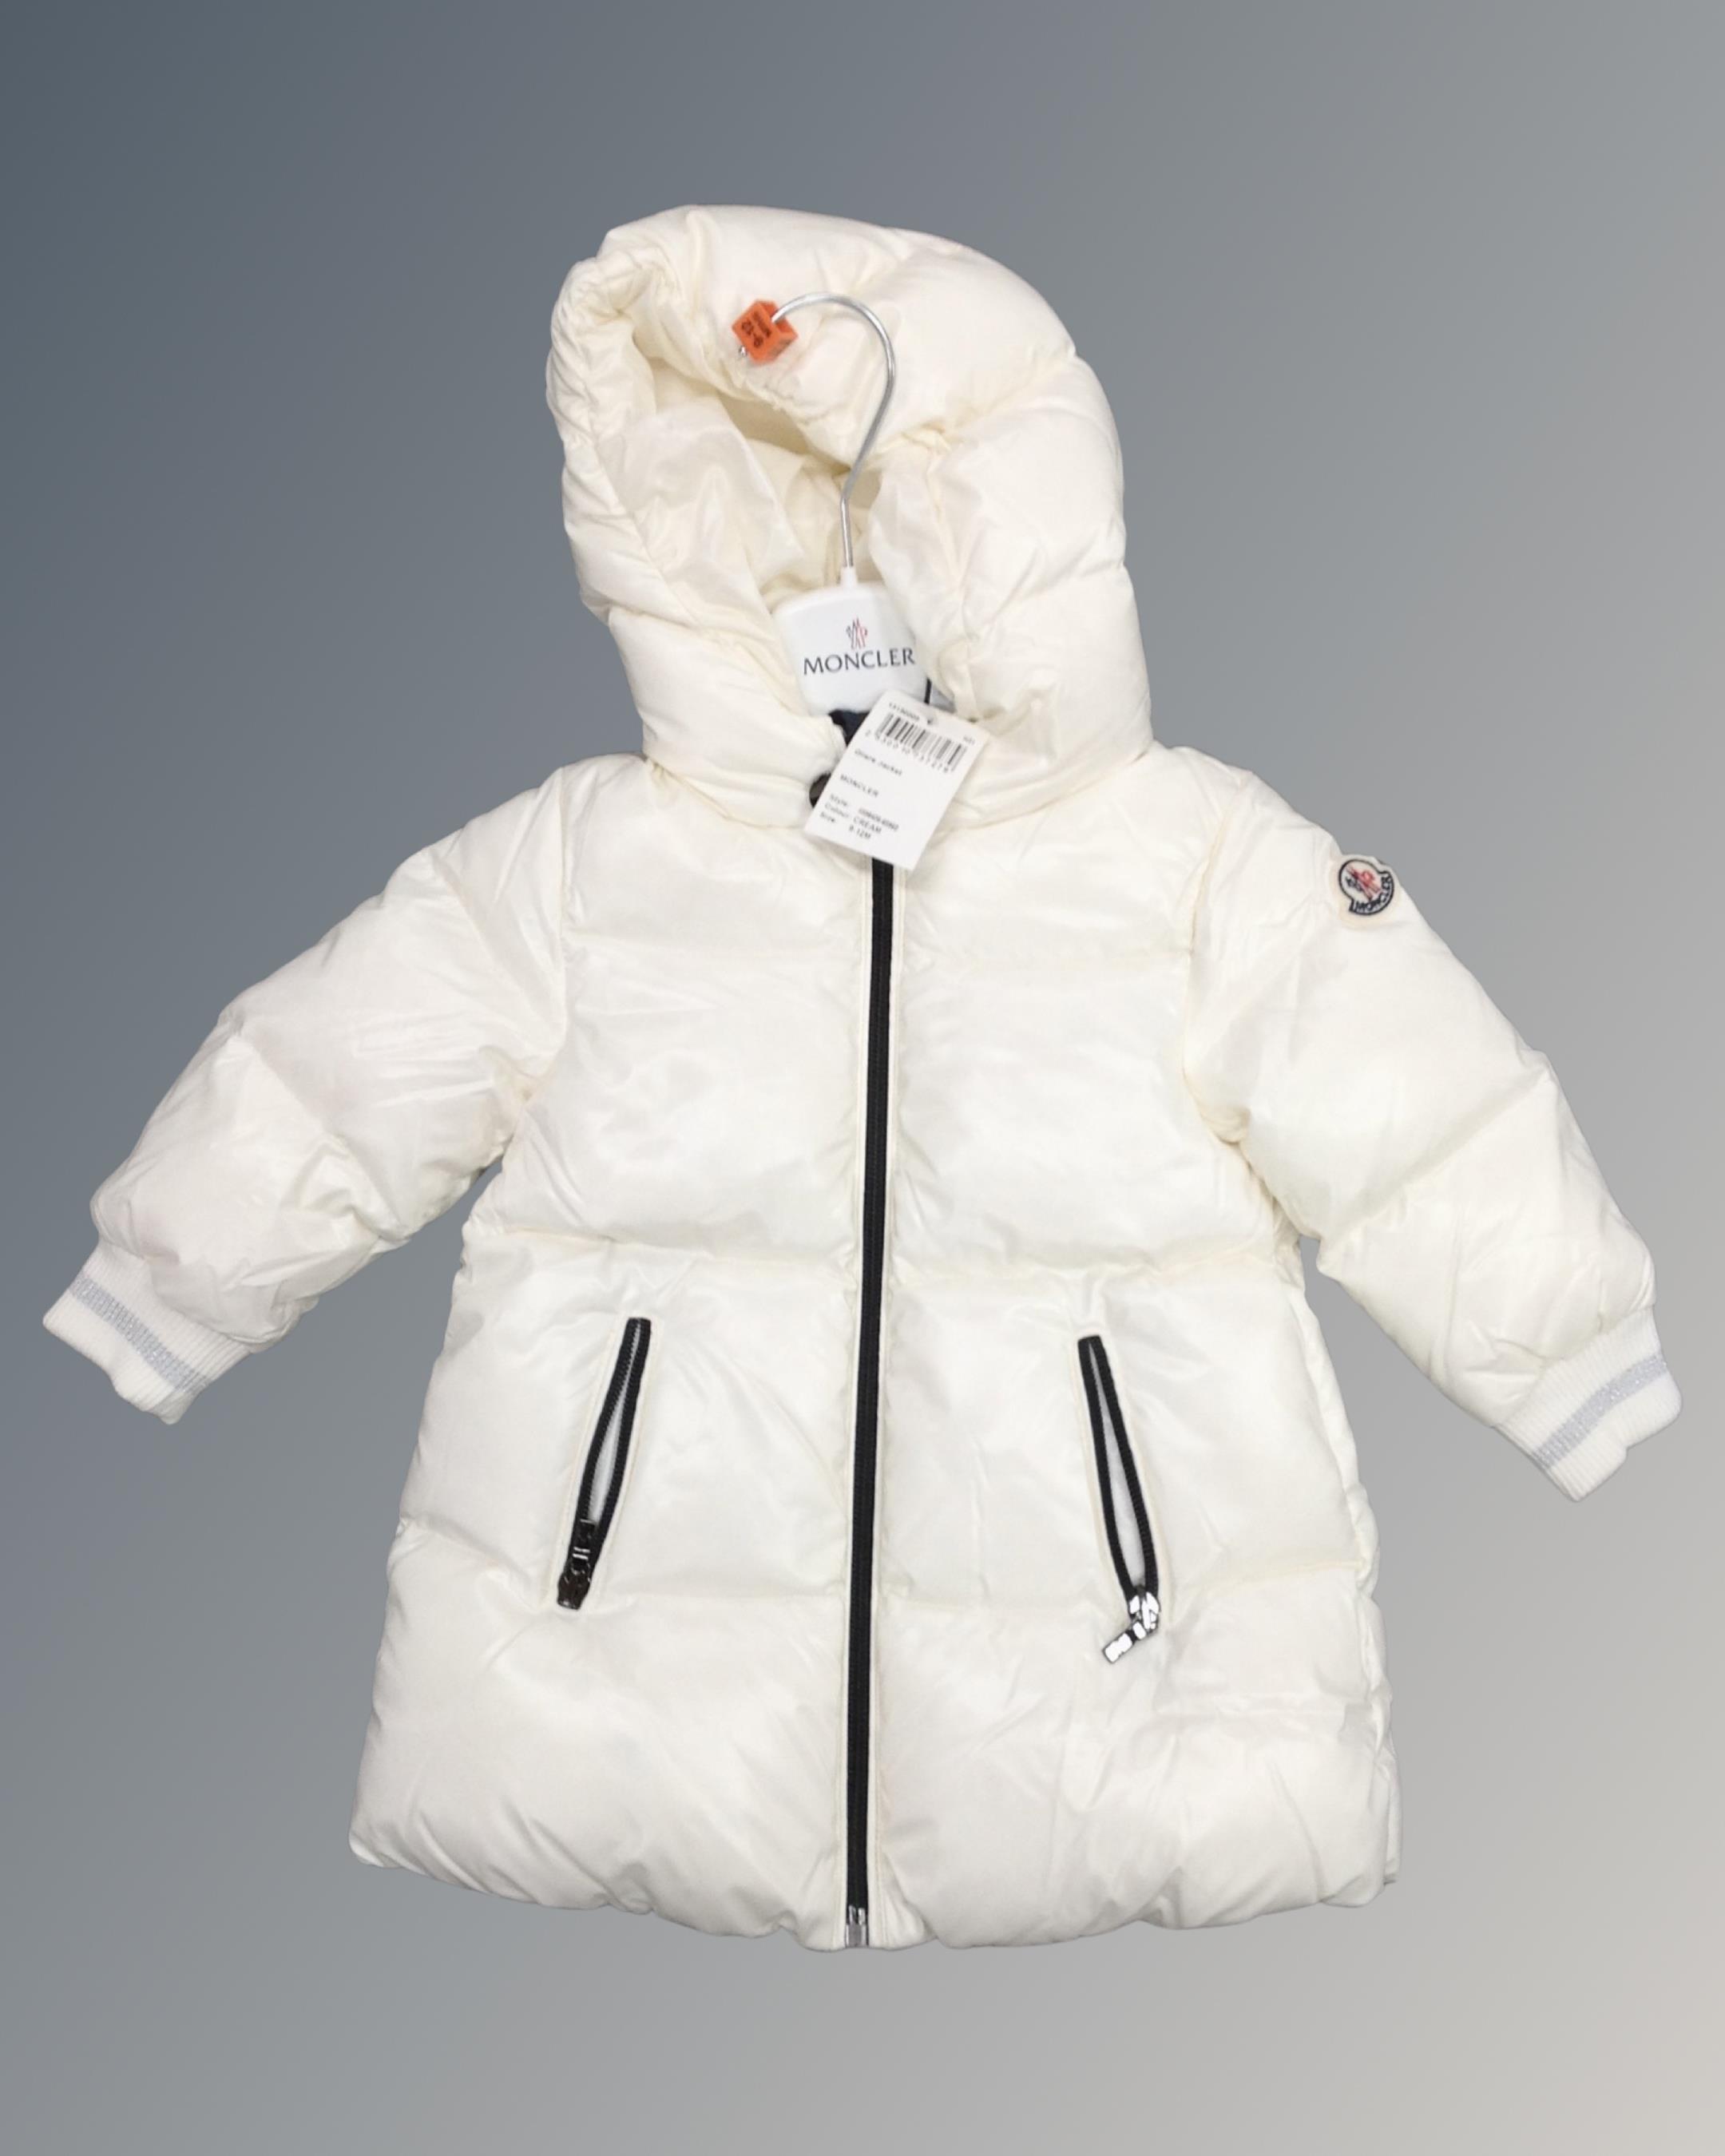 A Moncler gilet jacket, cream, size 9-12 months, tagged and new.